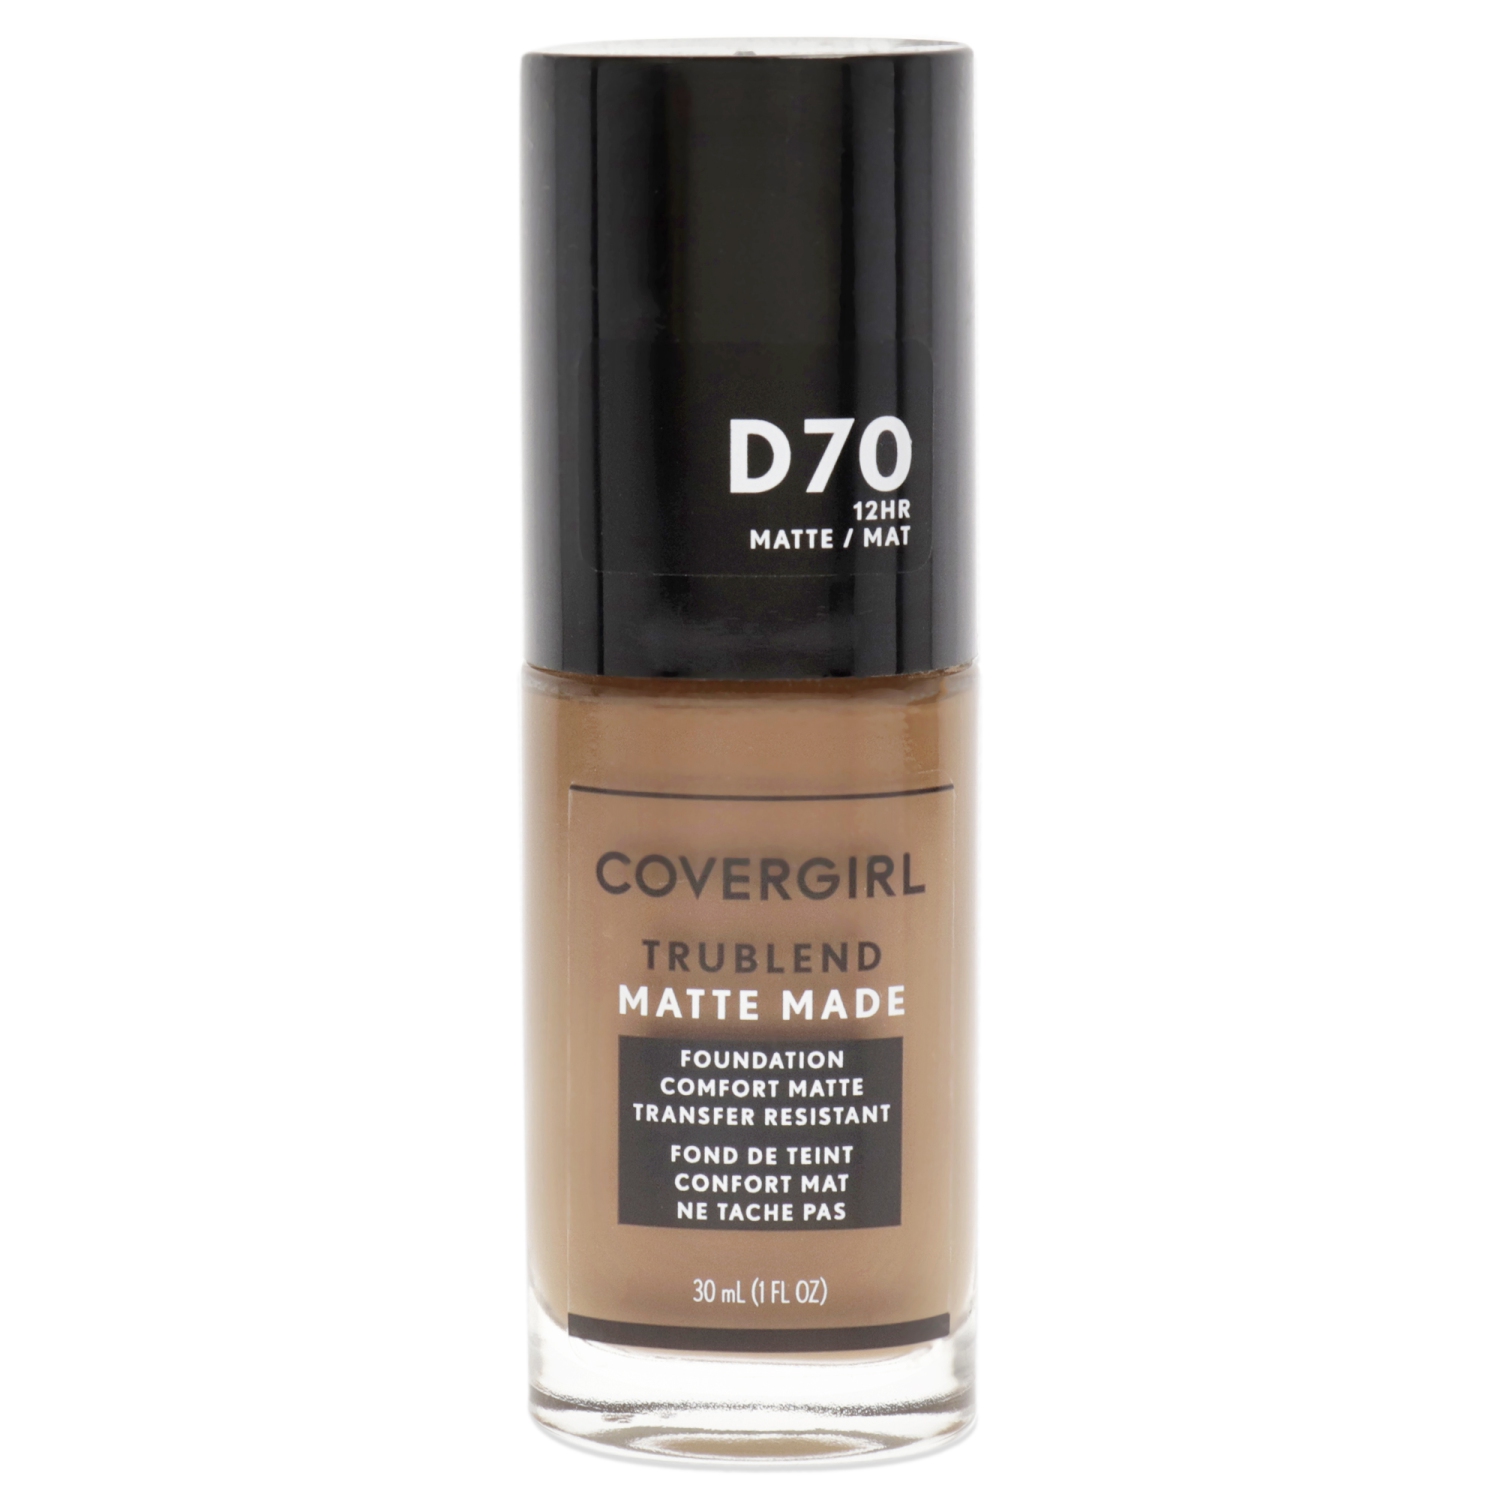 TruBlend Matte Made Liquid Foundation - D70 Cappuccino by CoverGirl for Women - 1 oz Foundation